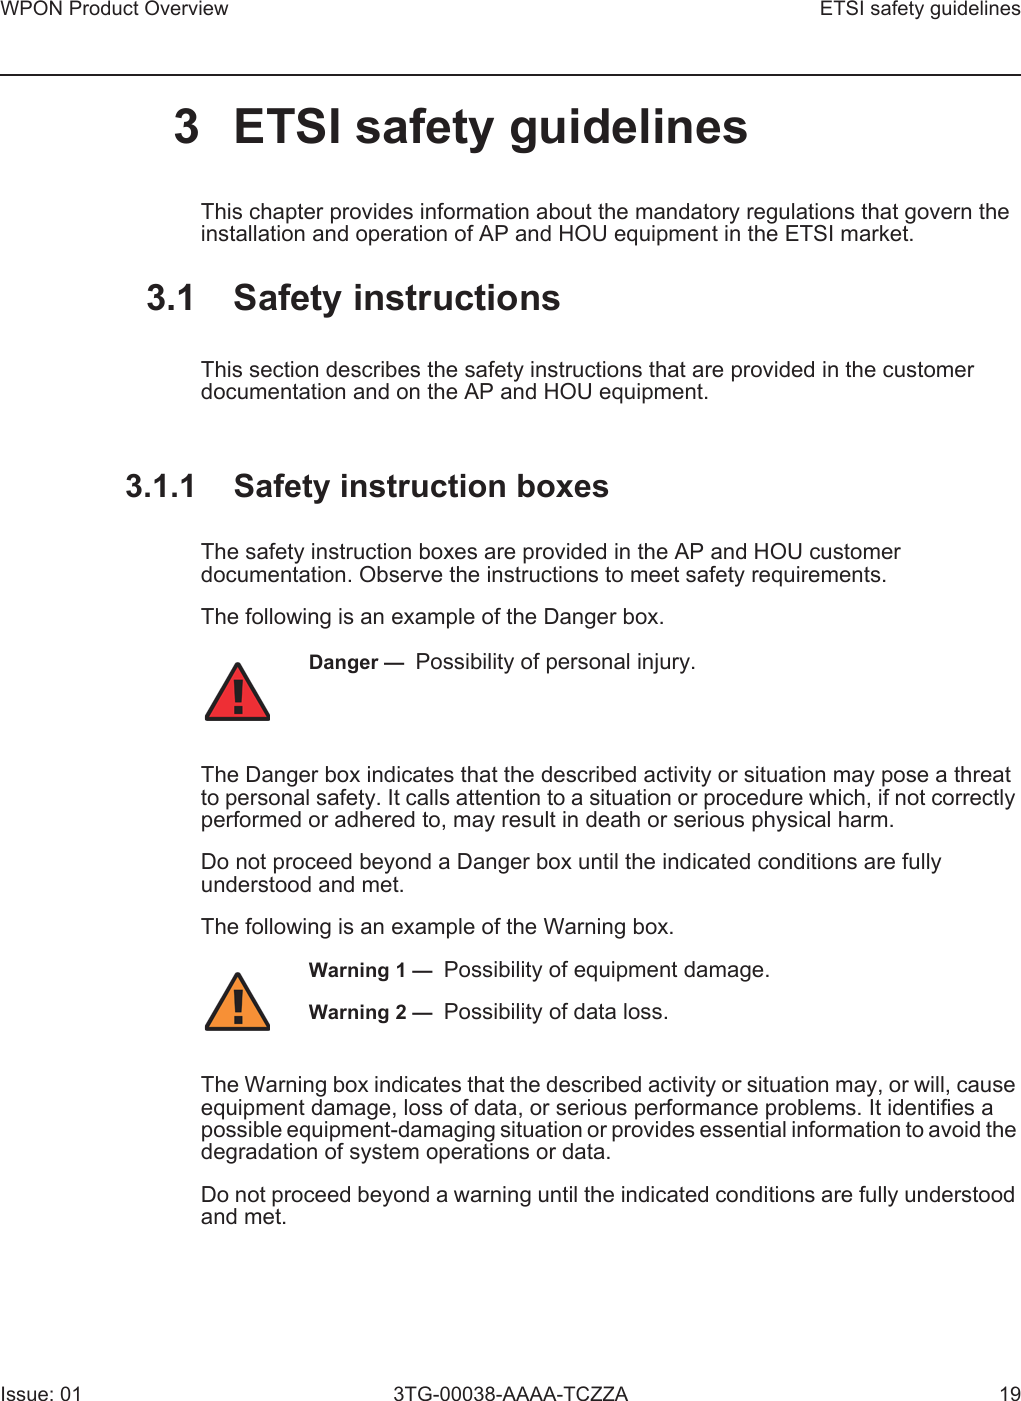 WPON Product Overview ETSI safety guidelinesIssue: 01 3TG-00038-AAAA-TCZZA 193 ETSI safety guidelinesThis chapter provides information about the mandatory regulations that govern the installation and operation of AP and HOU equipment in the ETSI market.3.1 Safety instructionsThis section describes the safety instructions that are provided in the customer documentation and on the AP and HOU equipment.3.1.1 Safety instruction boxesThe safety instruction boxes are provided in the AP and HOU customer documentation. Observe the instructions to meet safety requirements.The following is an example of the Danger box.The Danger box indicates that the described activity or situation may pose a threat to personal safety. It calls attention to a situation or procedure which, if not correctly performed or adhered to, may result in death or serious physical harm. Do not proceed beyond a Danger box until the indicated conditions are fully understood and met.The following is an example of the Warning box.The Warning box indicates that the described activity or situation may, or will, cause equipment damage, loss of data, or serious performance problems. It identifies a possible equipment-damaging situation or provides essential information to avoid the degradation of system operations or data.Do not proceed beyond a warning until the indicated conditions are fully understood and met.Danger —  Possibility of personal injury. Warning 1 —  Possibility of equipment damage.Warning 2 —  Possibility of data loss.